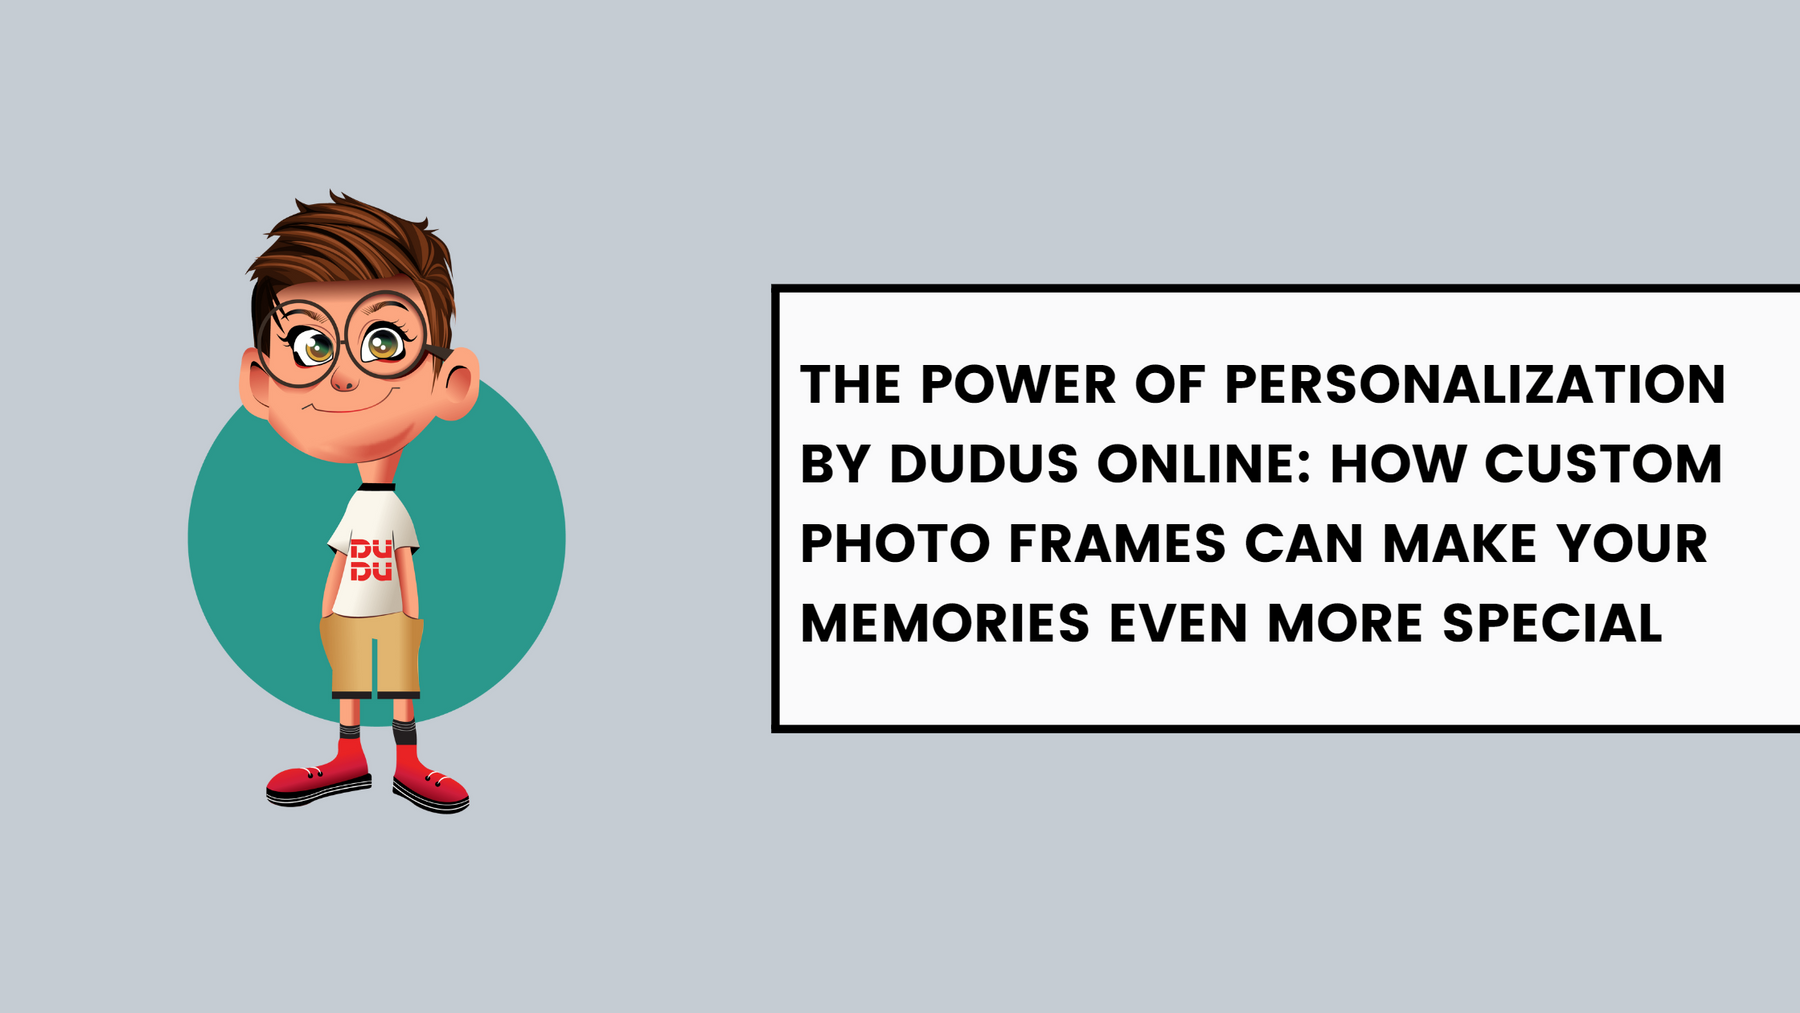 The Power of Personalization by Dudus Online: How Custom Photo Frames Can Make Your Memories Even More Special